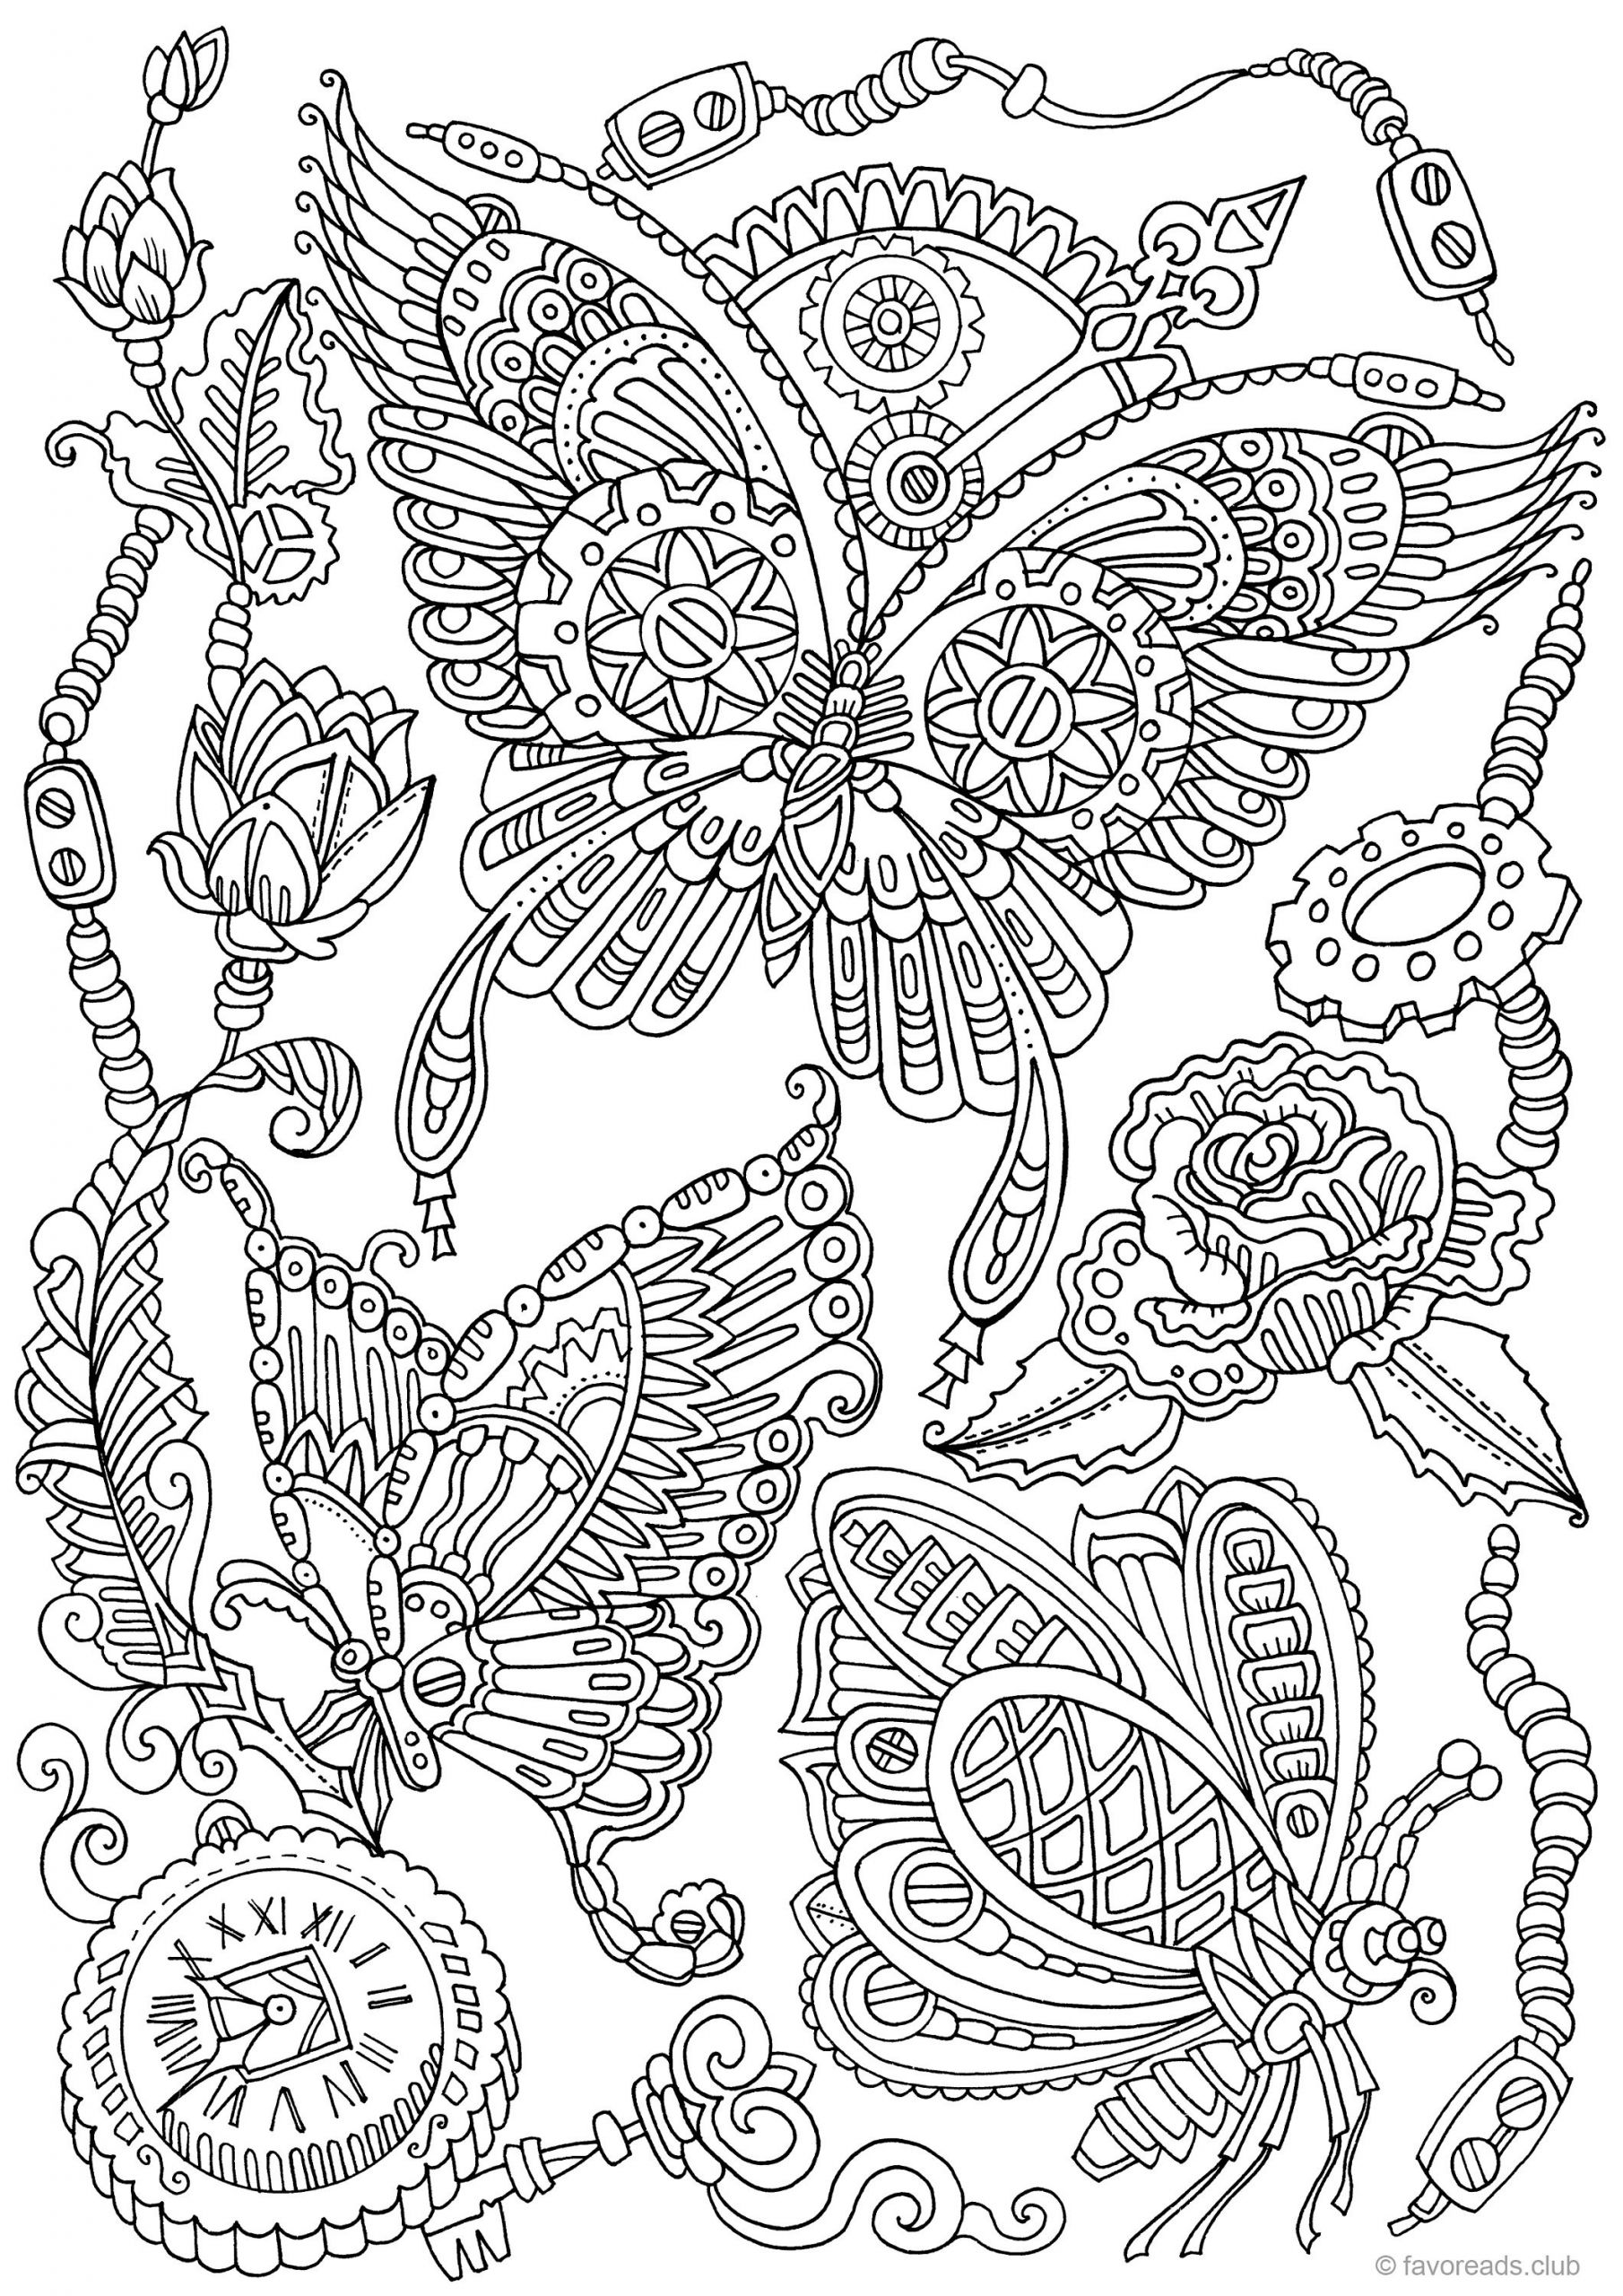 Coloring Pages For Adults Free Printable
 Steampunk Butterflies Printable Adult Coloring Page from